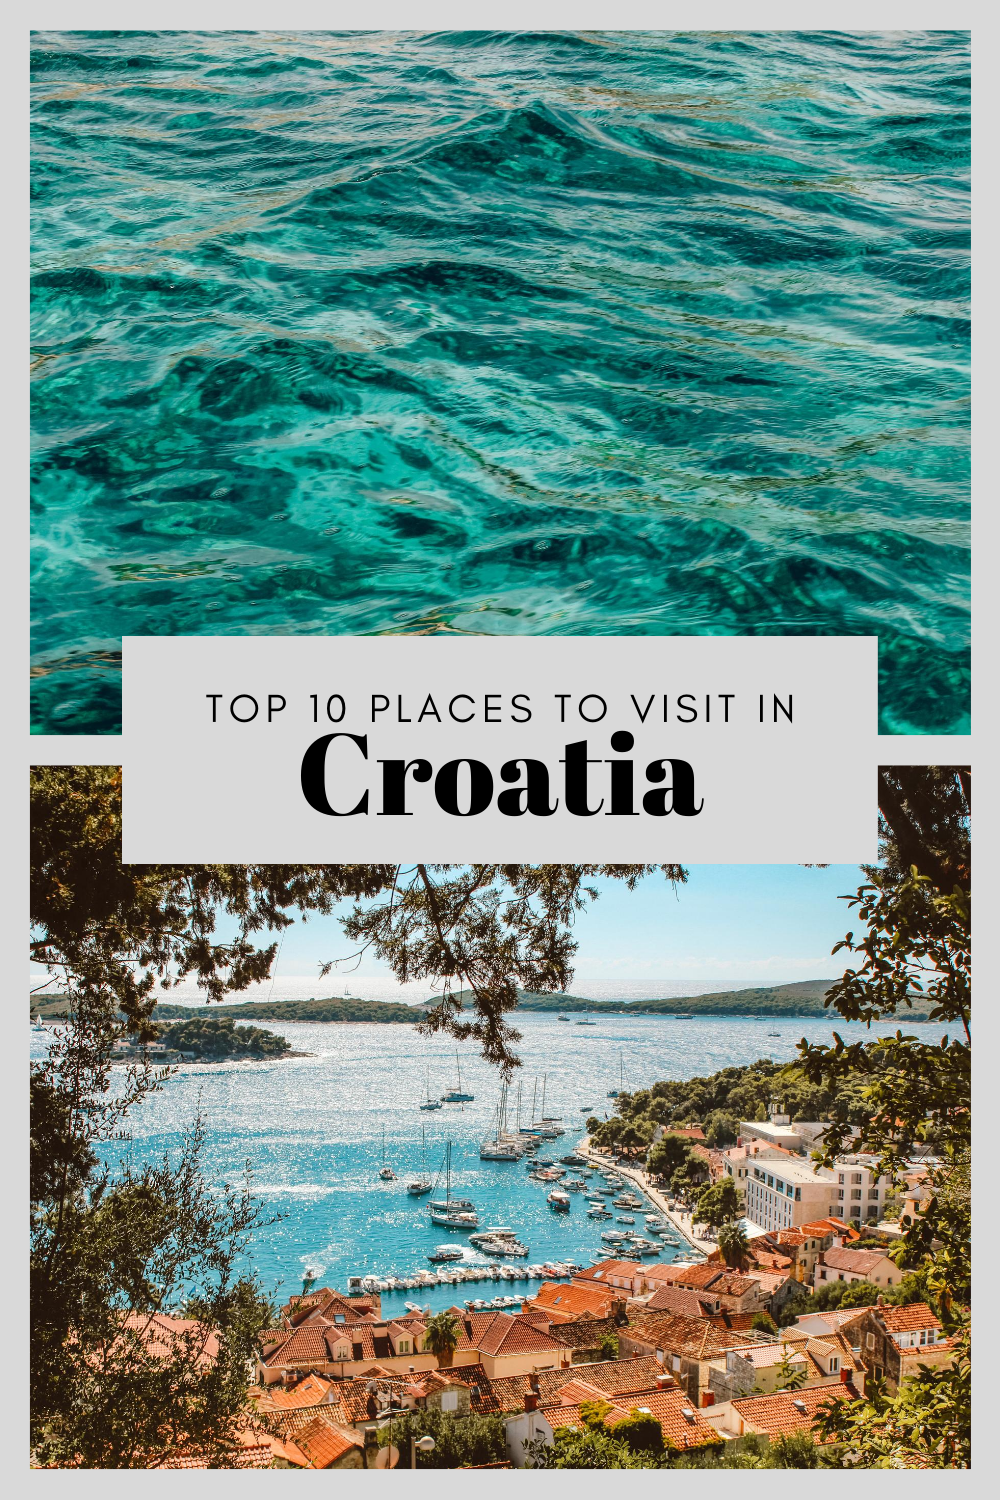 Top 10 towns and cities to visit in Croatia